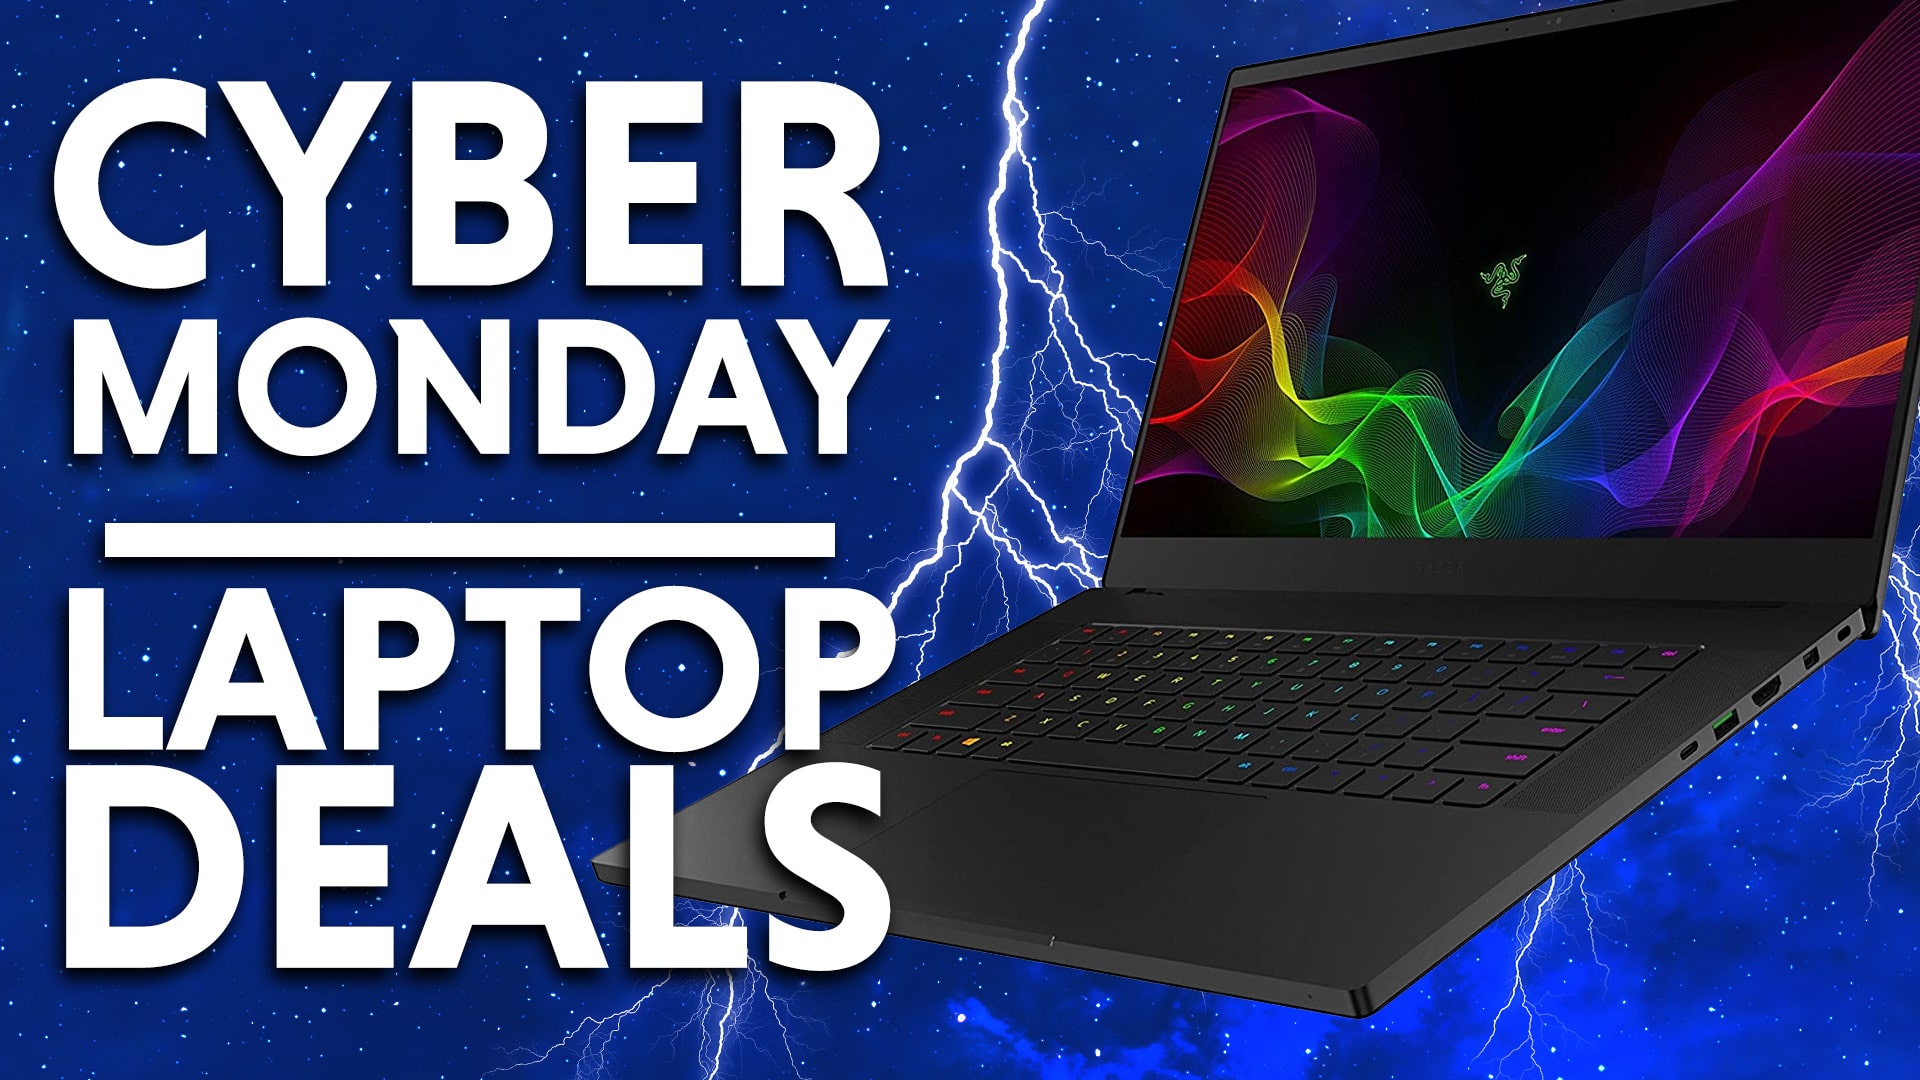 Cyber Monday laptop Deals whichlaptop